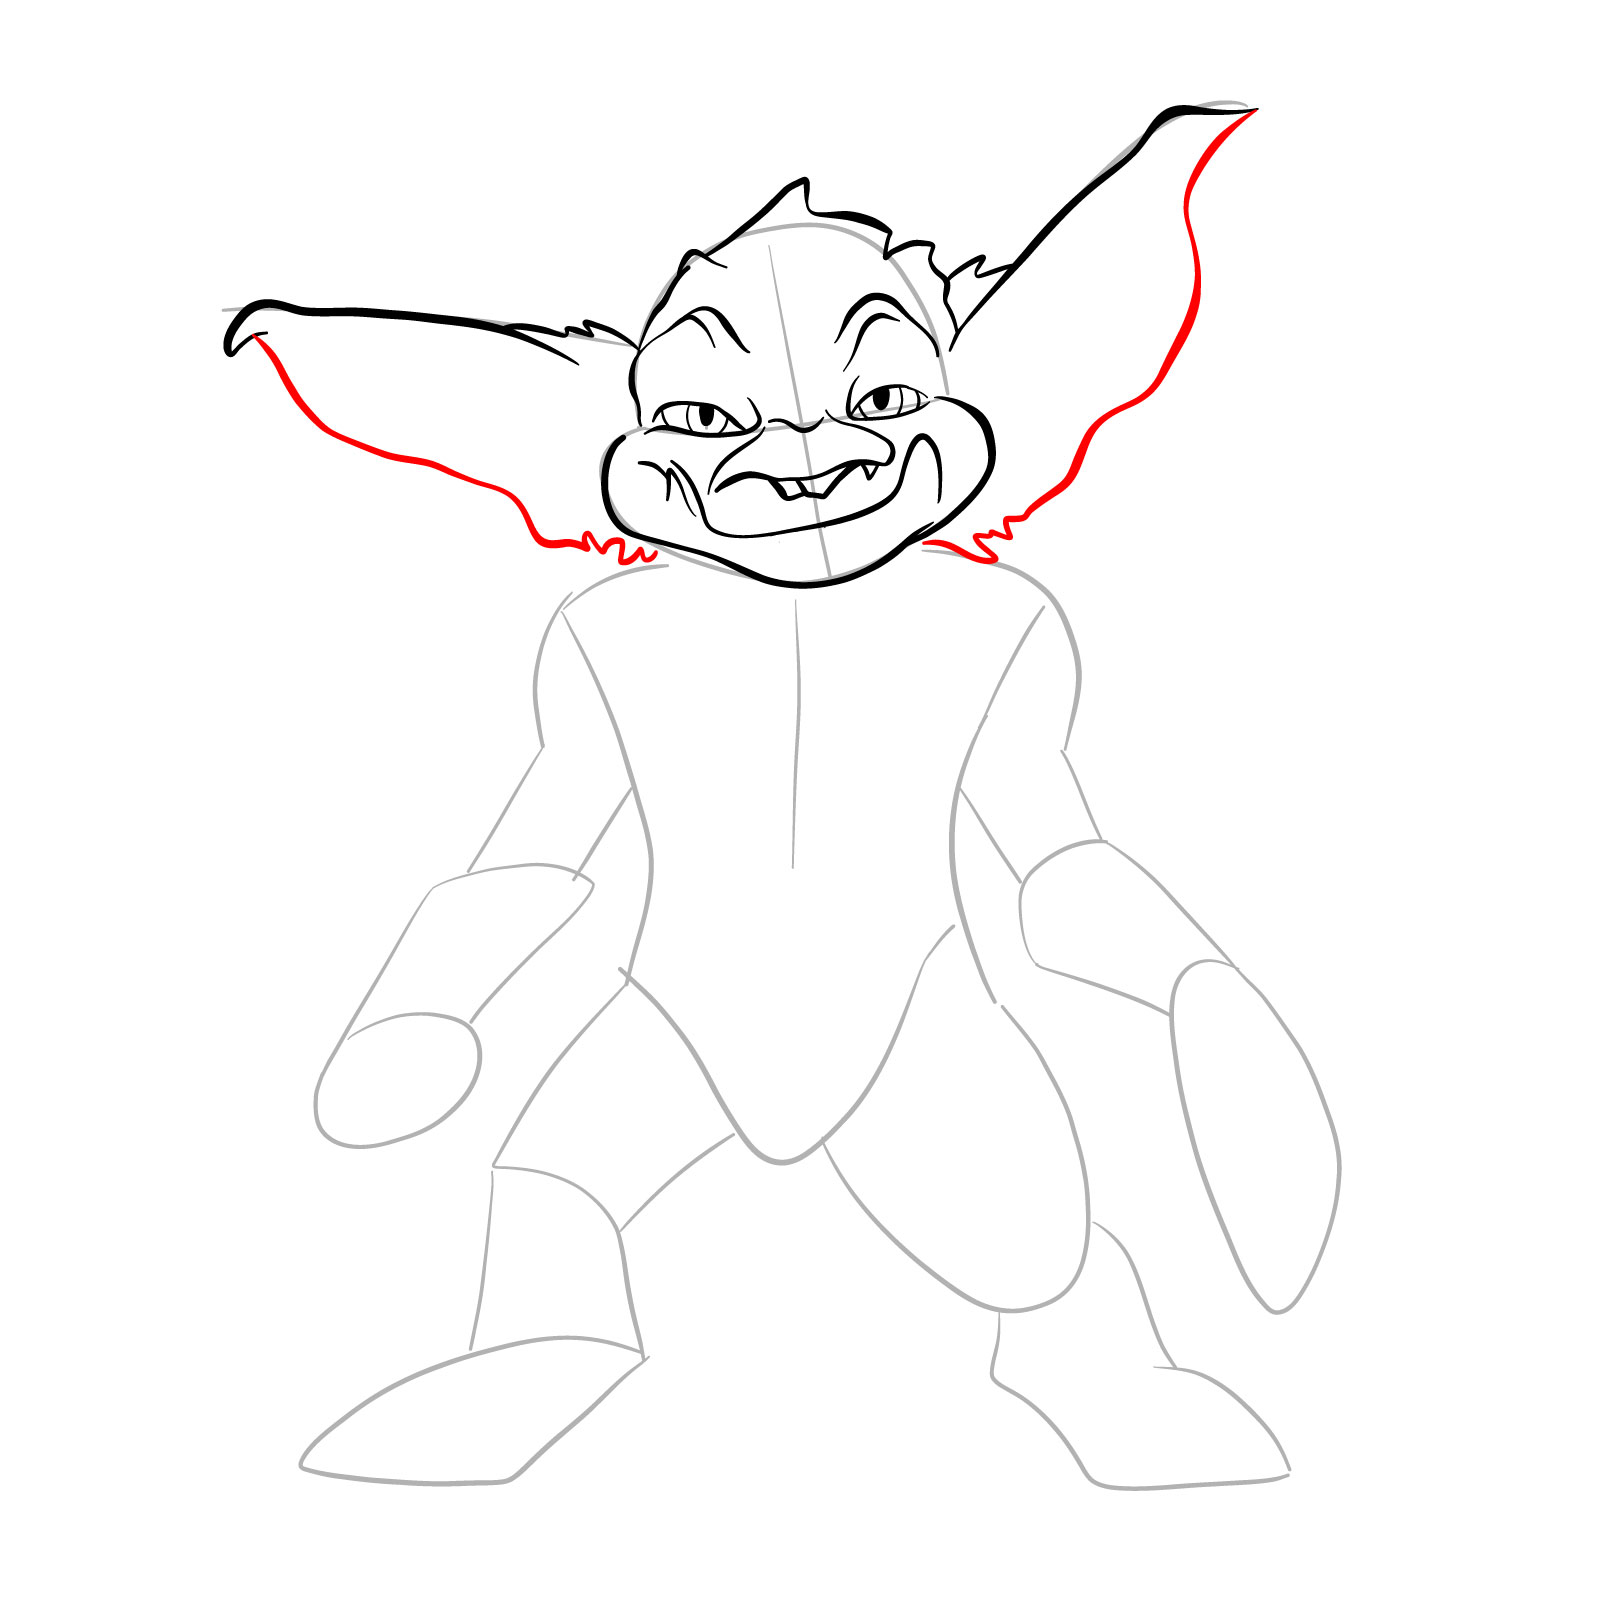 How to draw a Goblin - step 13